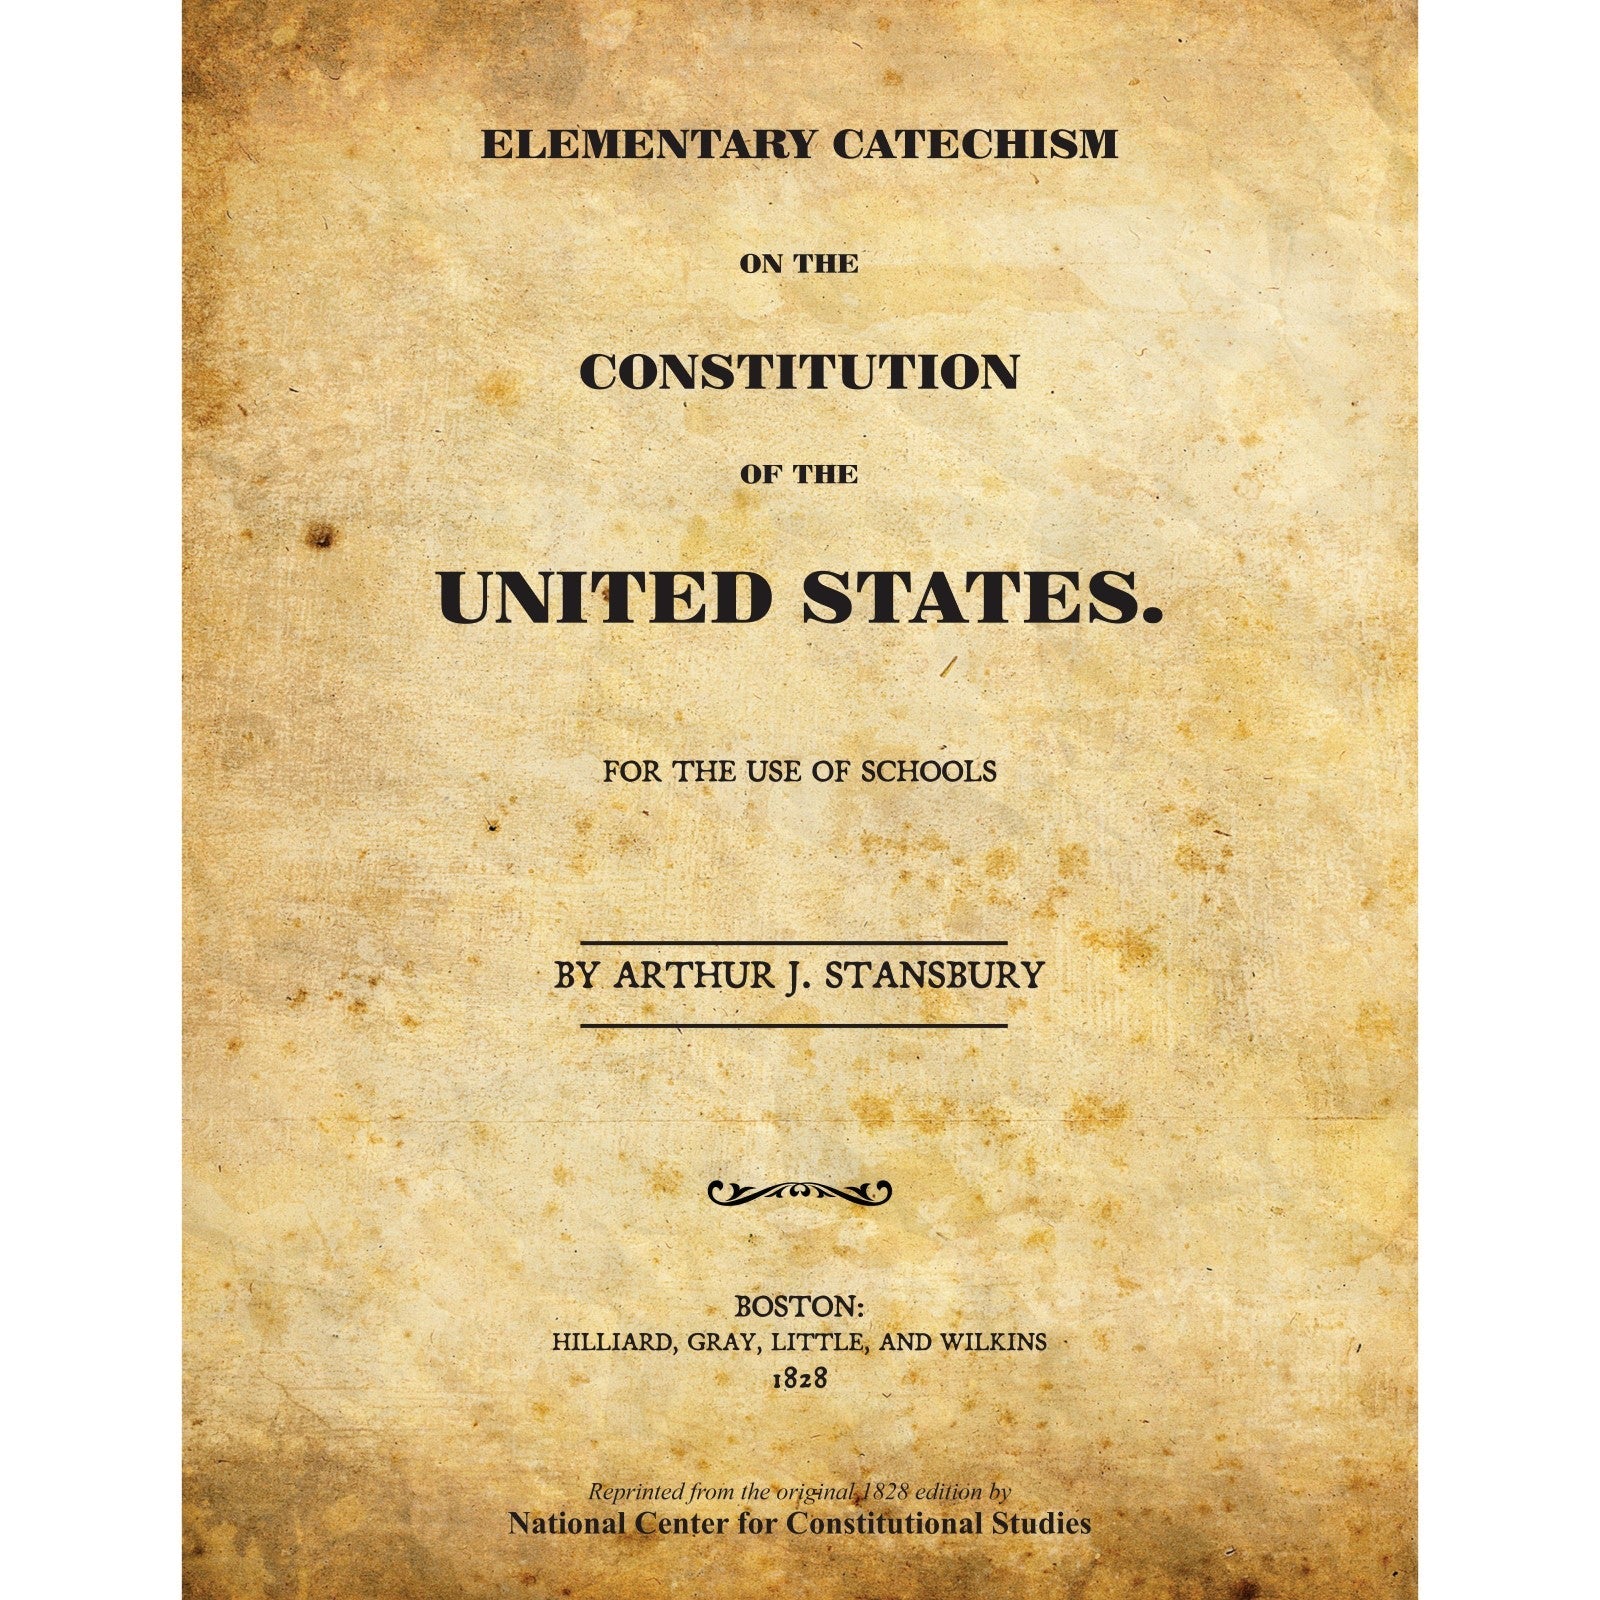 Scratch 'n Dent - Catechism on the U.S. Constitution